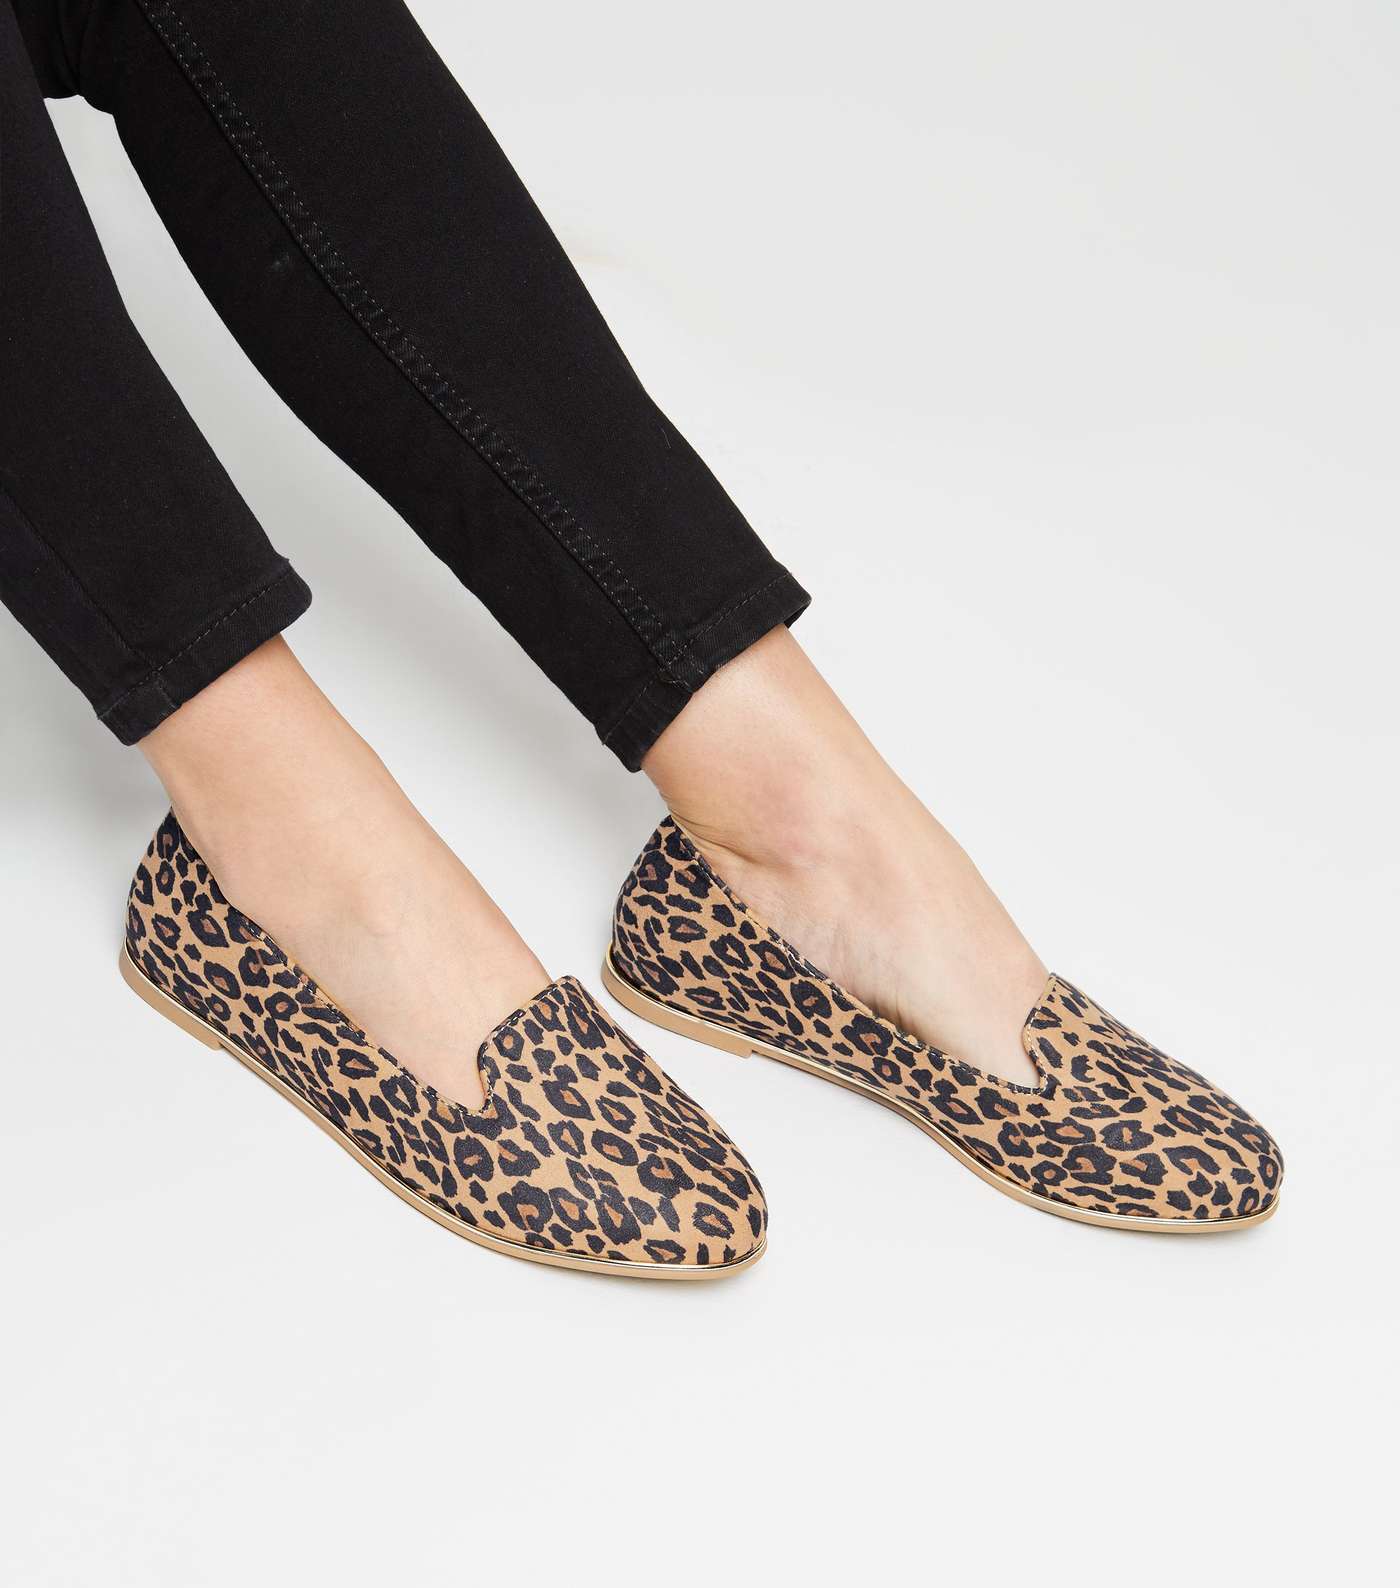 Wide Fit Stone Leopard Print Metal Trim Loafers Image 2